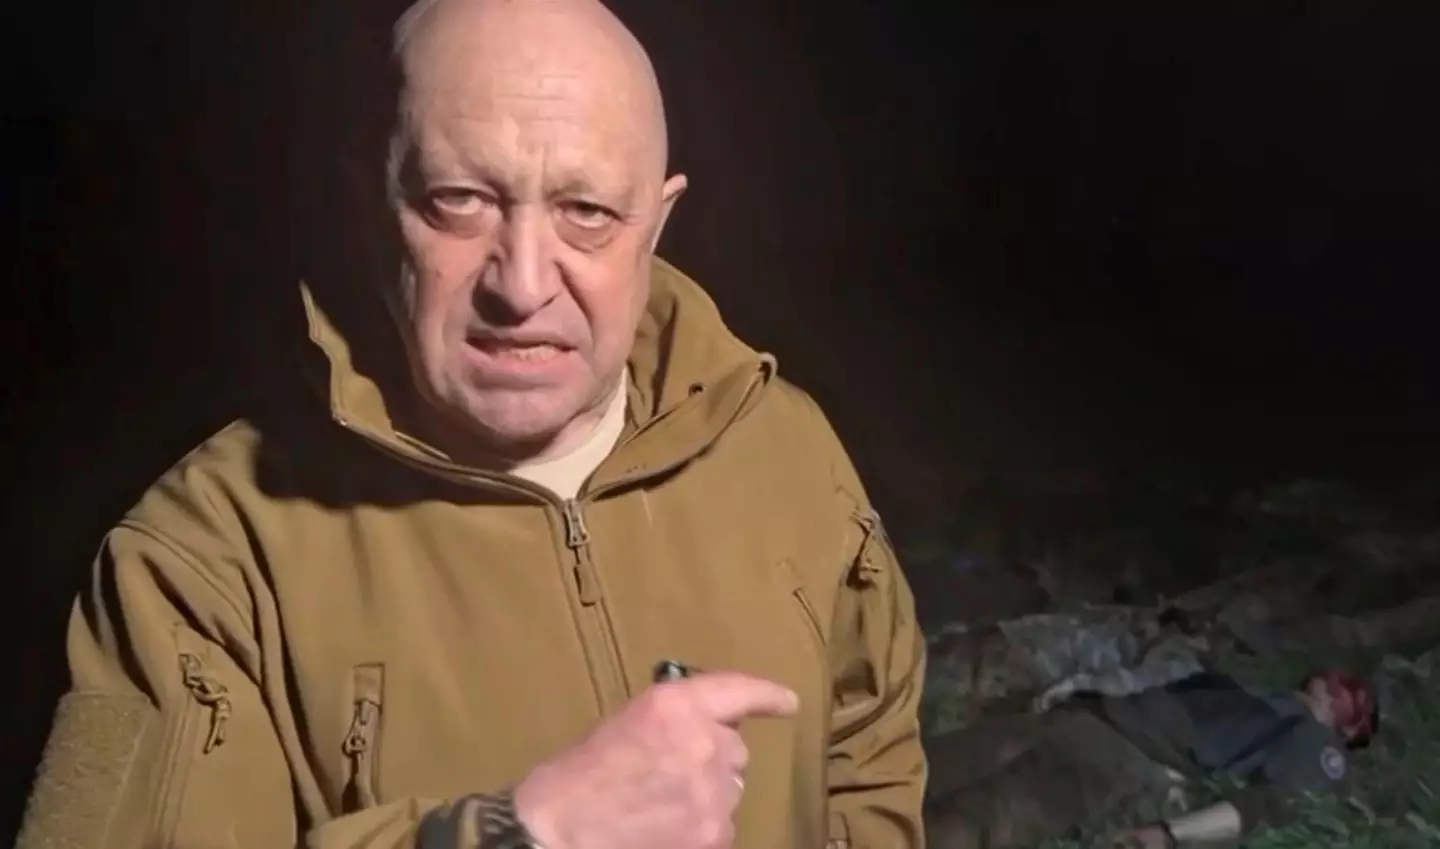 Yevgeny Prigozhin, formerly Vladimir Putin's chef, now appears to be leading a mercenary army against Moscow.